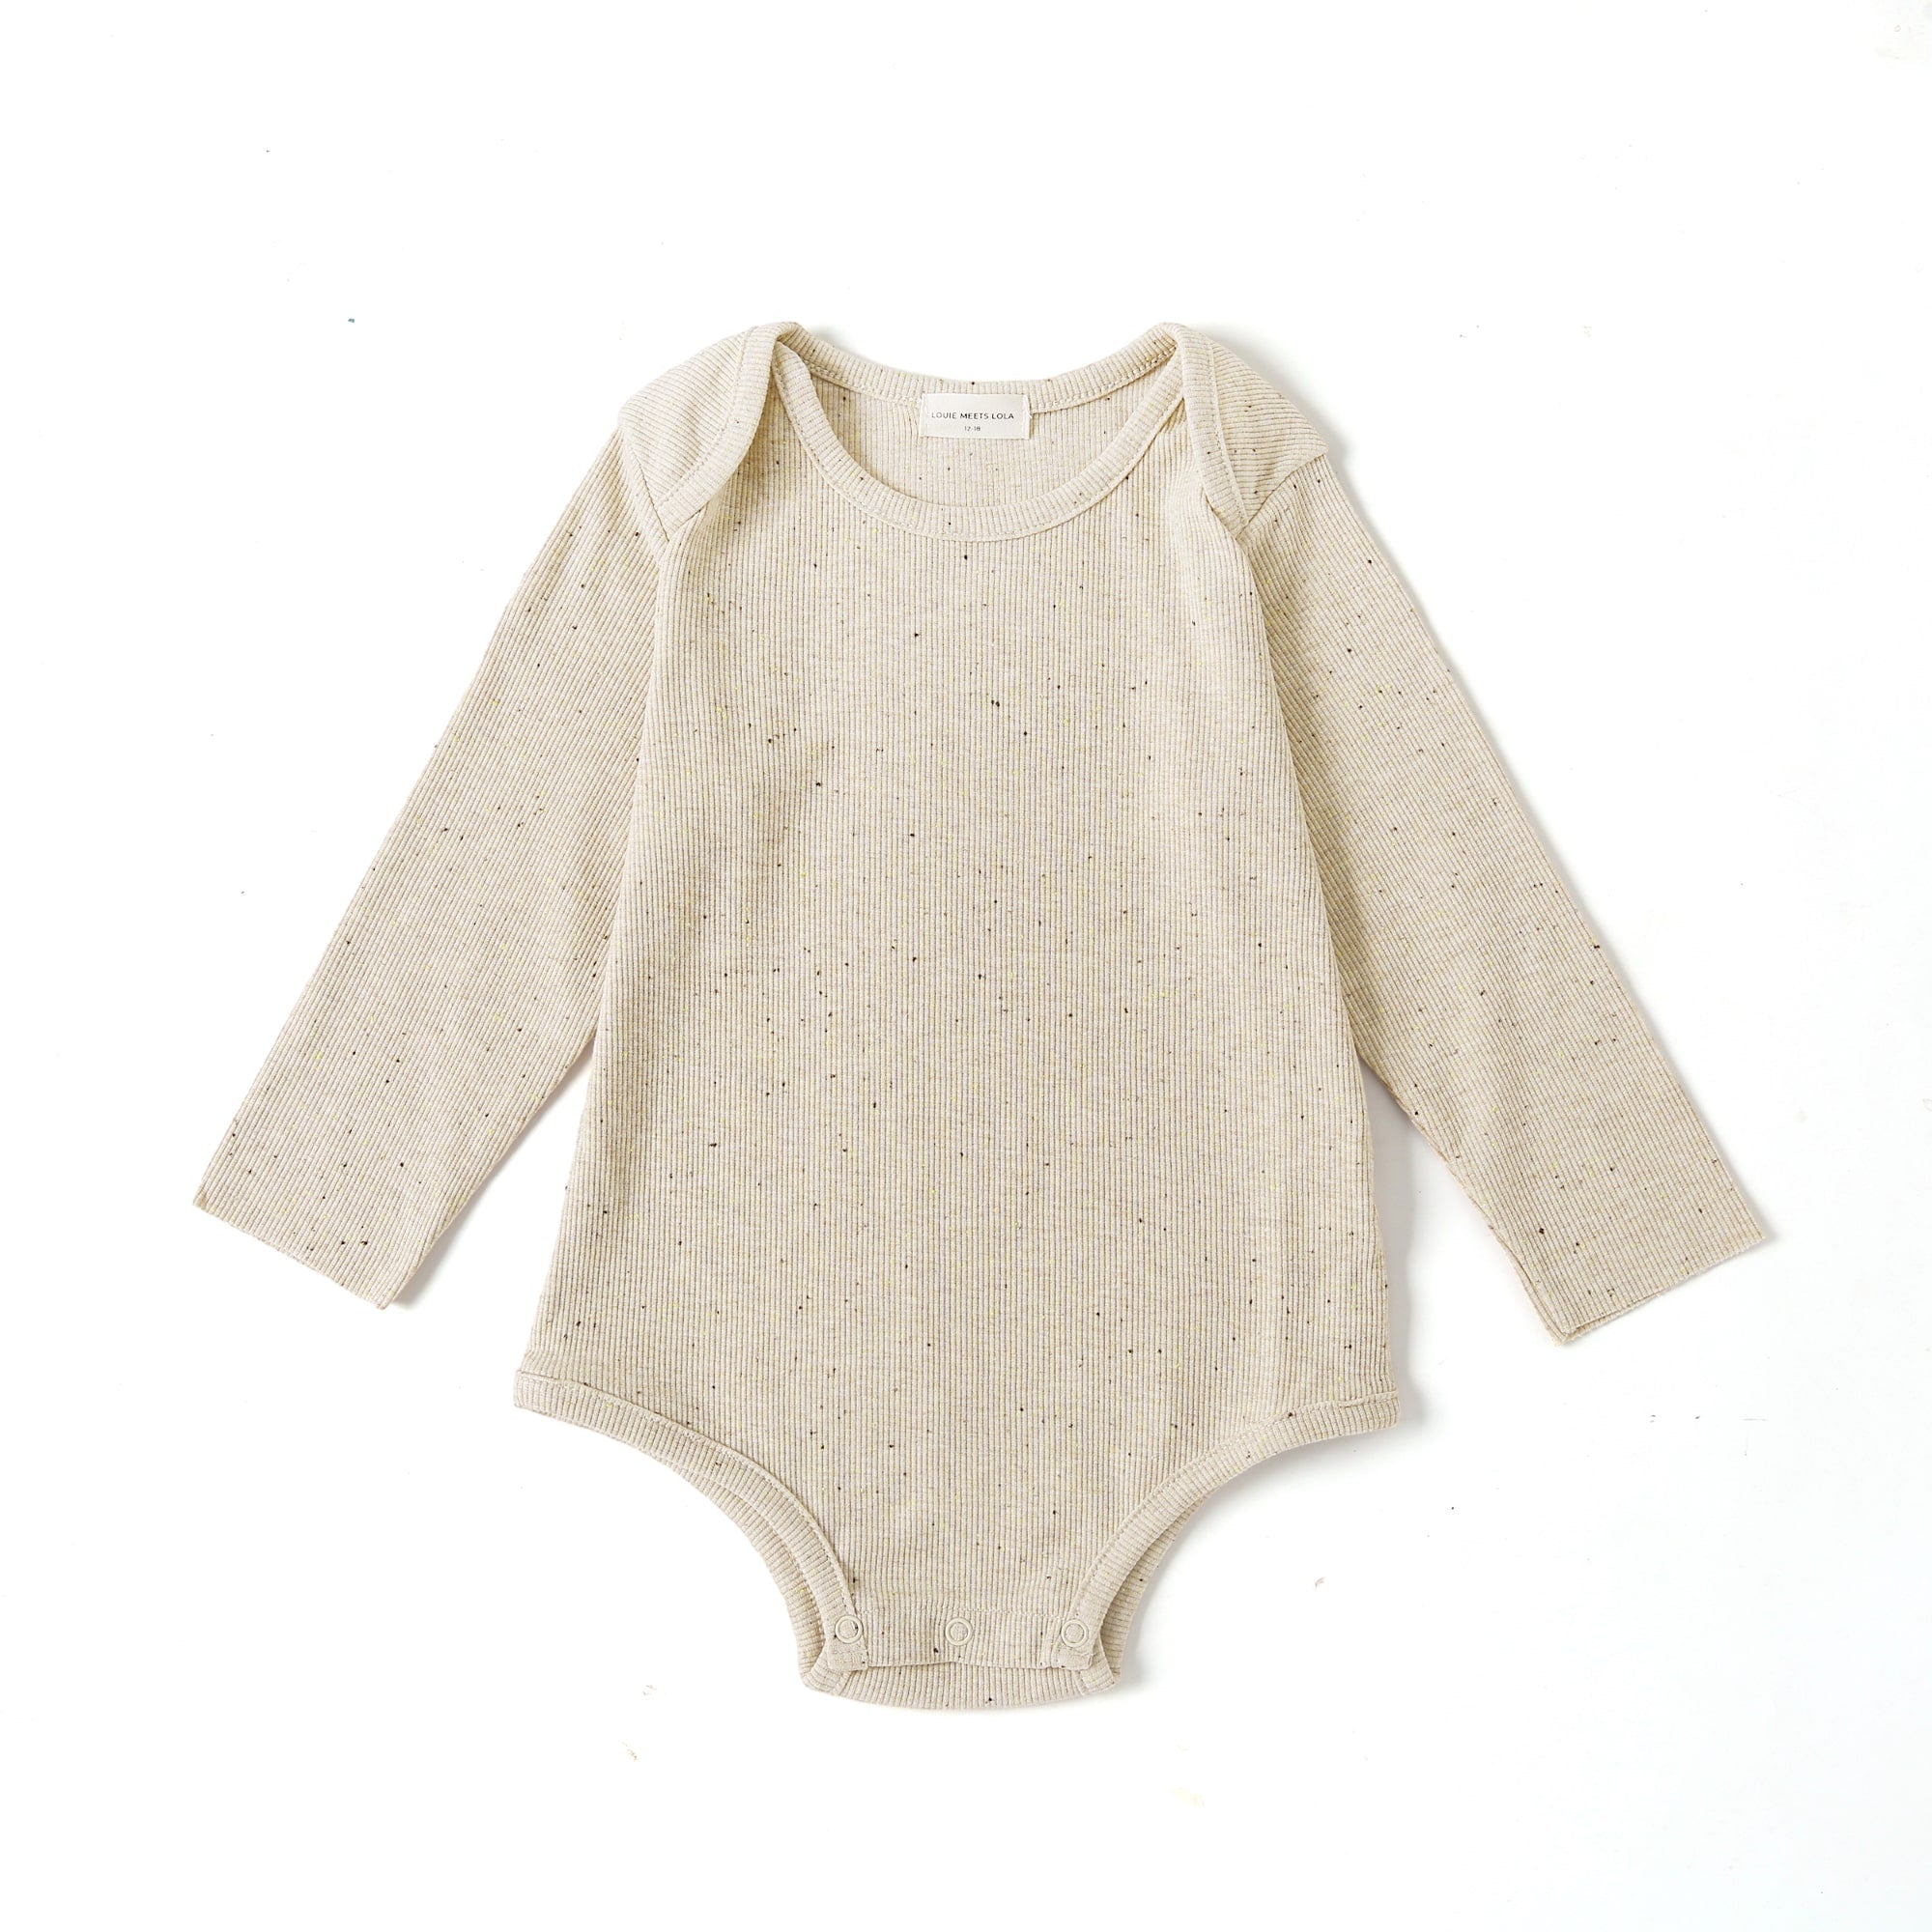 Chocolate Sprinkle Baby Romper - Baby One-Pieces at Louie Meets Lola